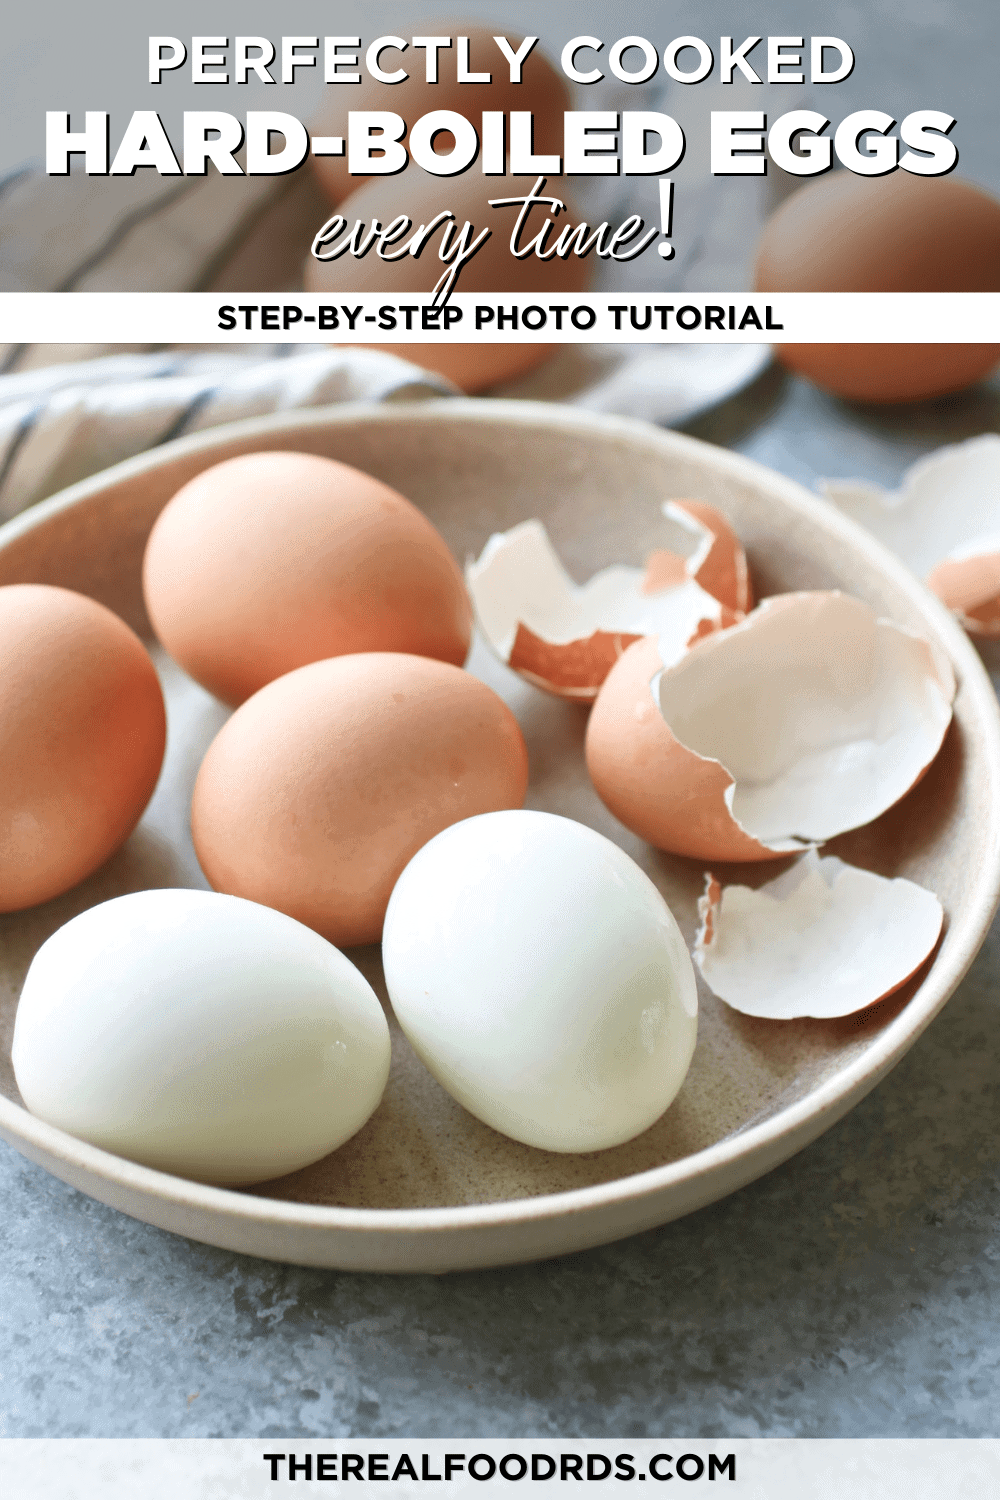 https://therealfooddietitians.com/wp-content/uploads/2019/06/How-To-Cook-Easy-Peel-Hard-Boiled-Eggs-1000x1500-2.png